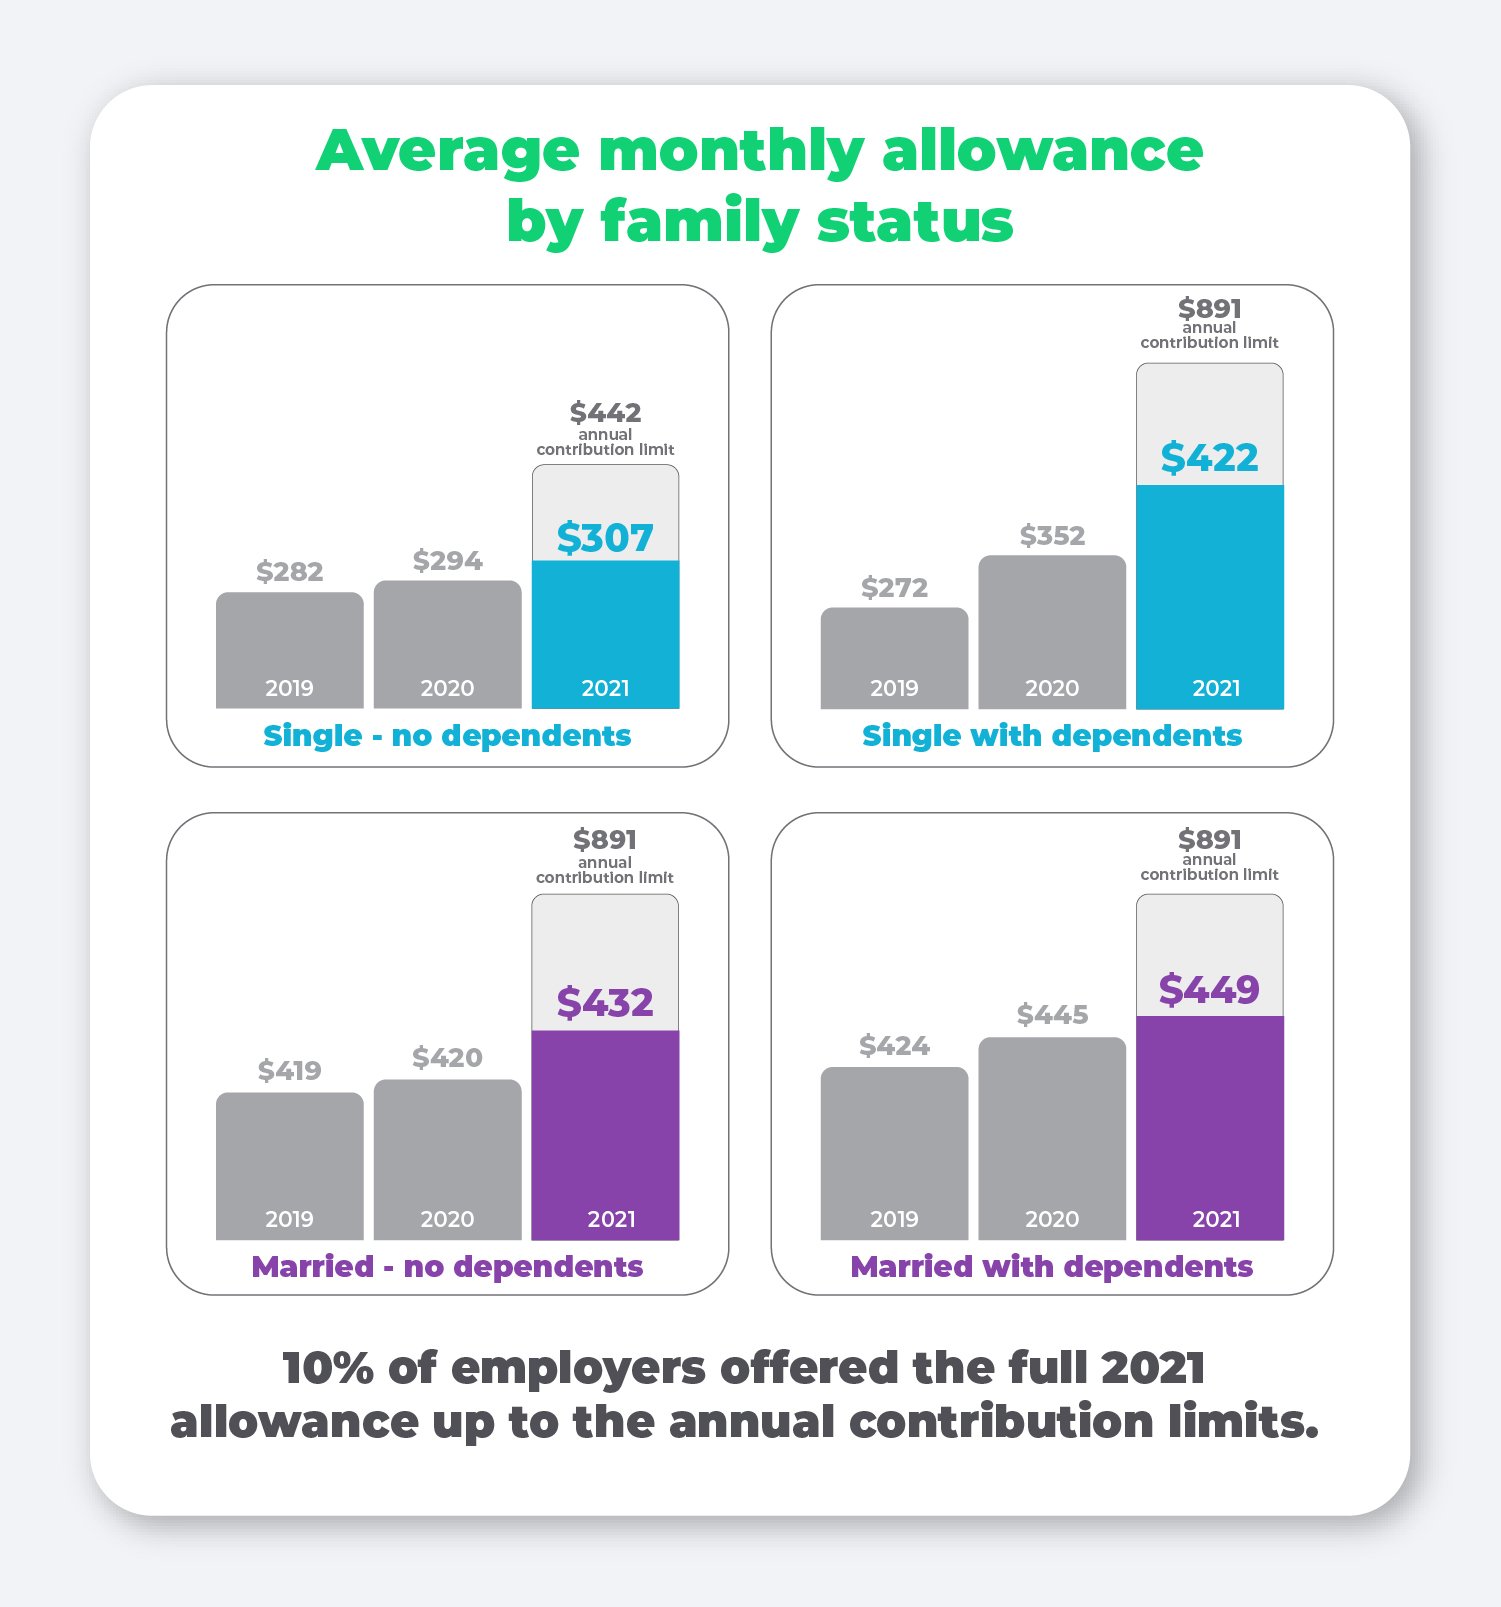 Average monthly allowance by family status.